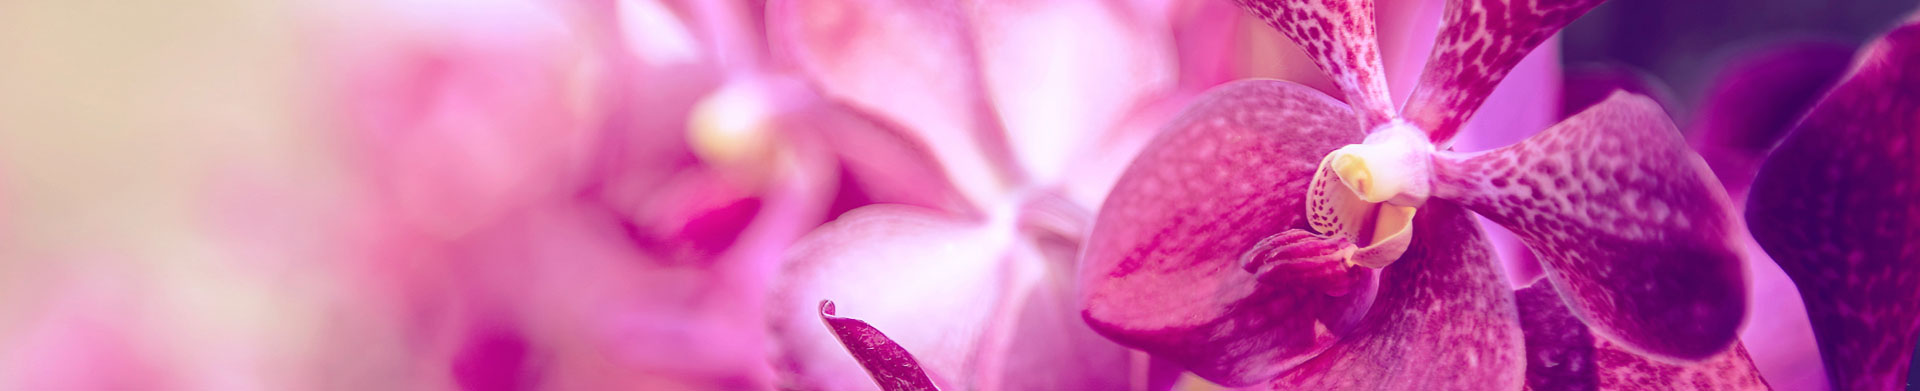 A close up of pink and purple orchids